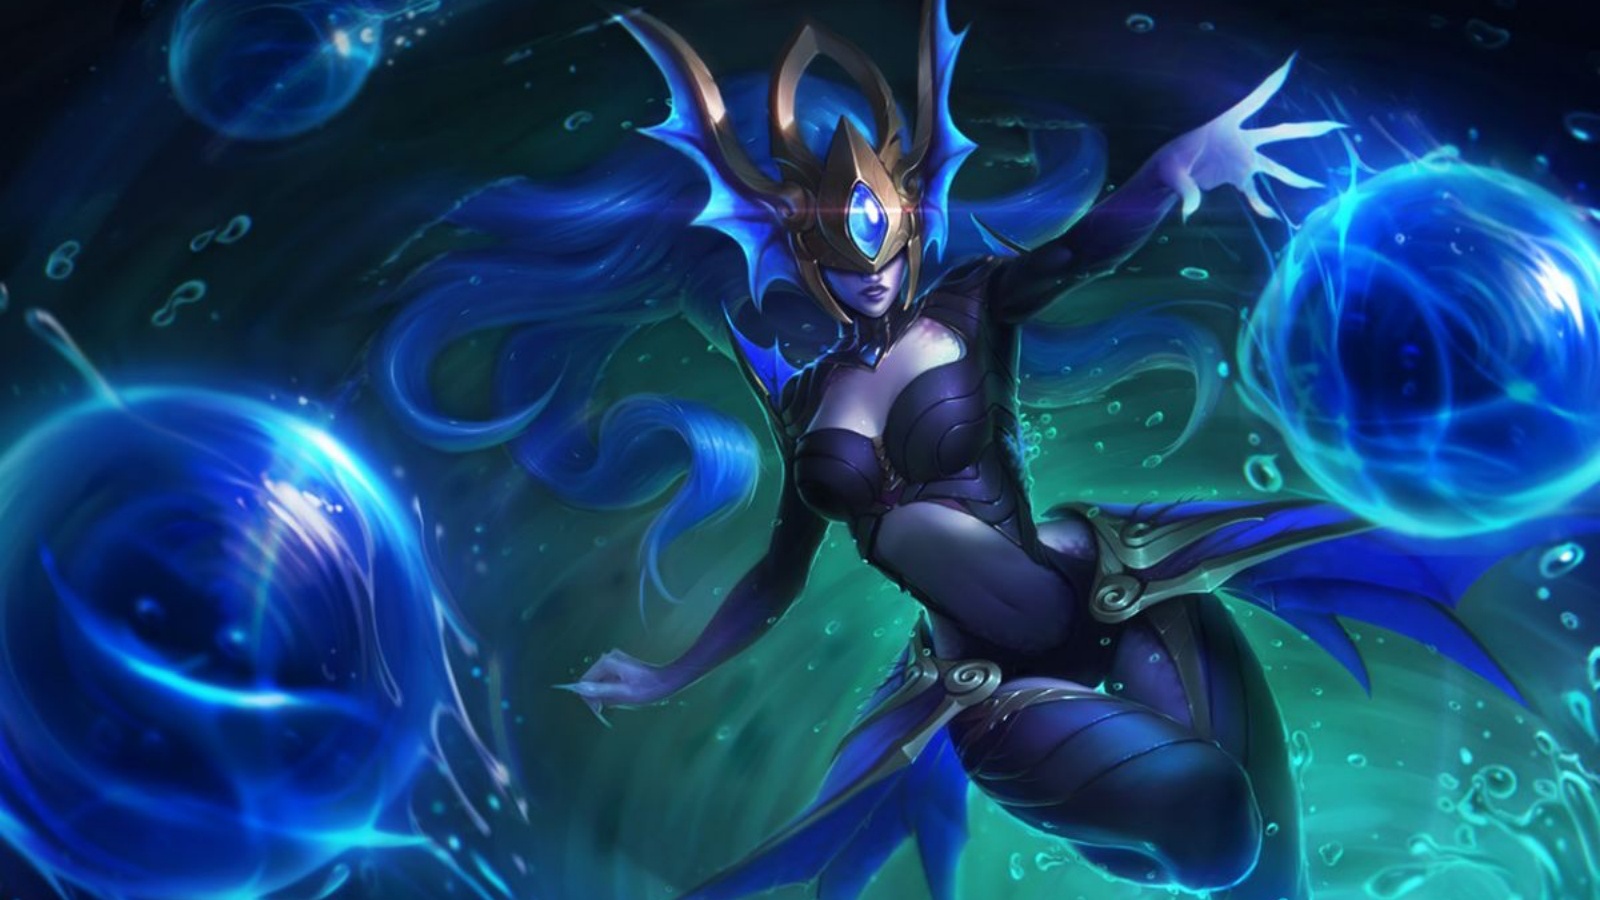 New League of Legends bug allows players to gain infinite mana